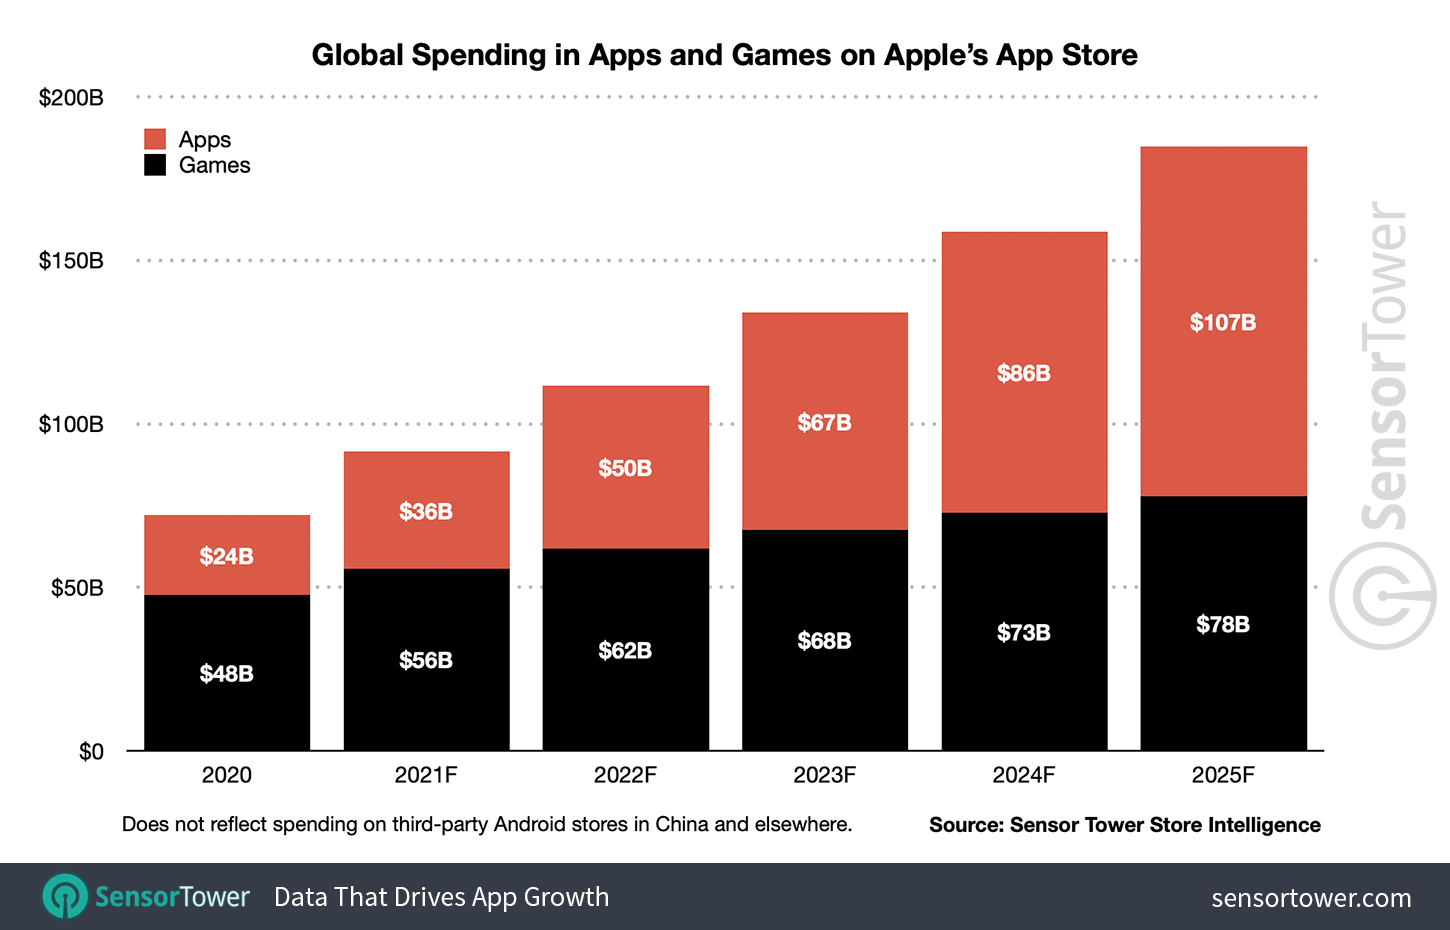 Apple TV App Store has 8,000 apps, 2,000 of which are games